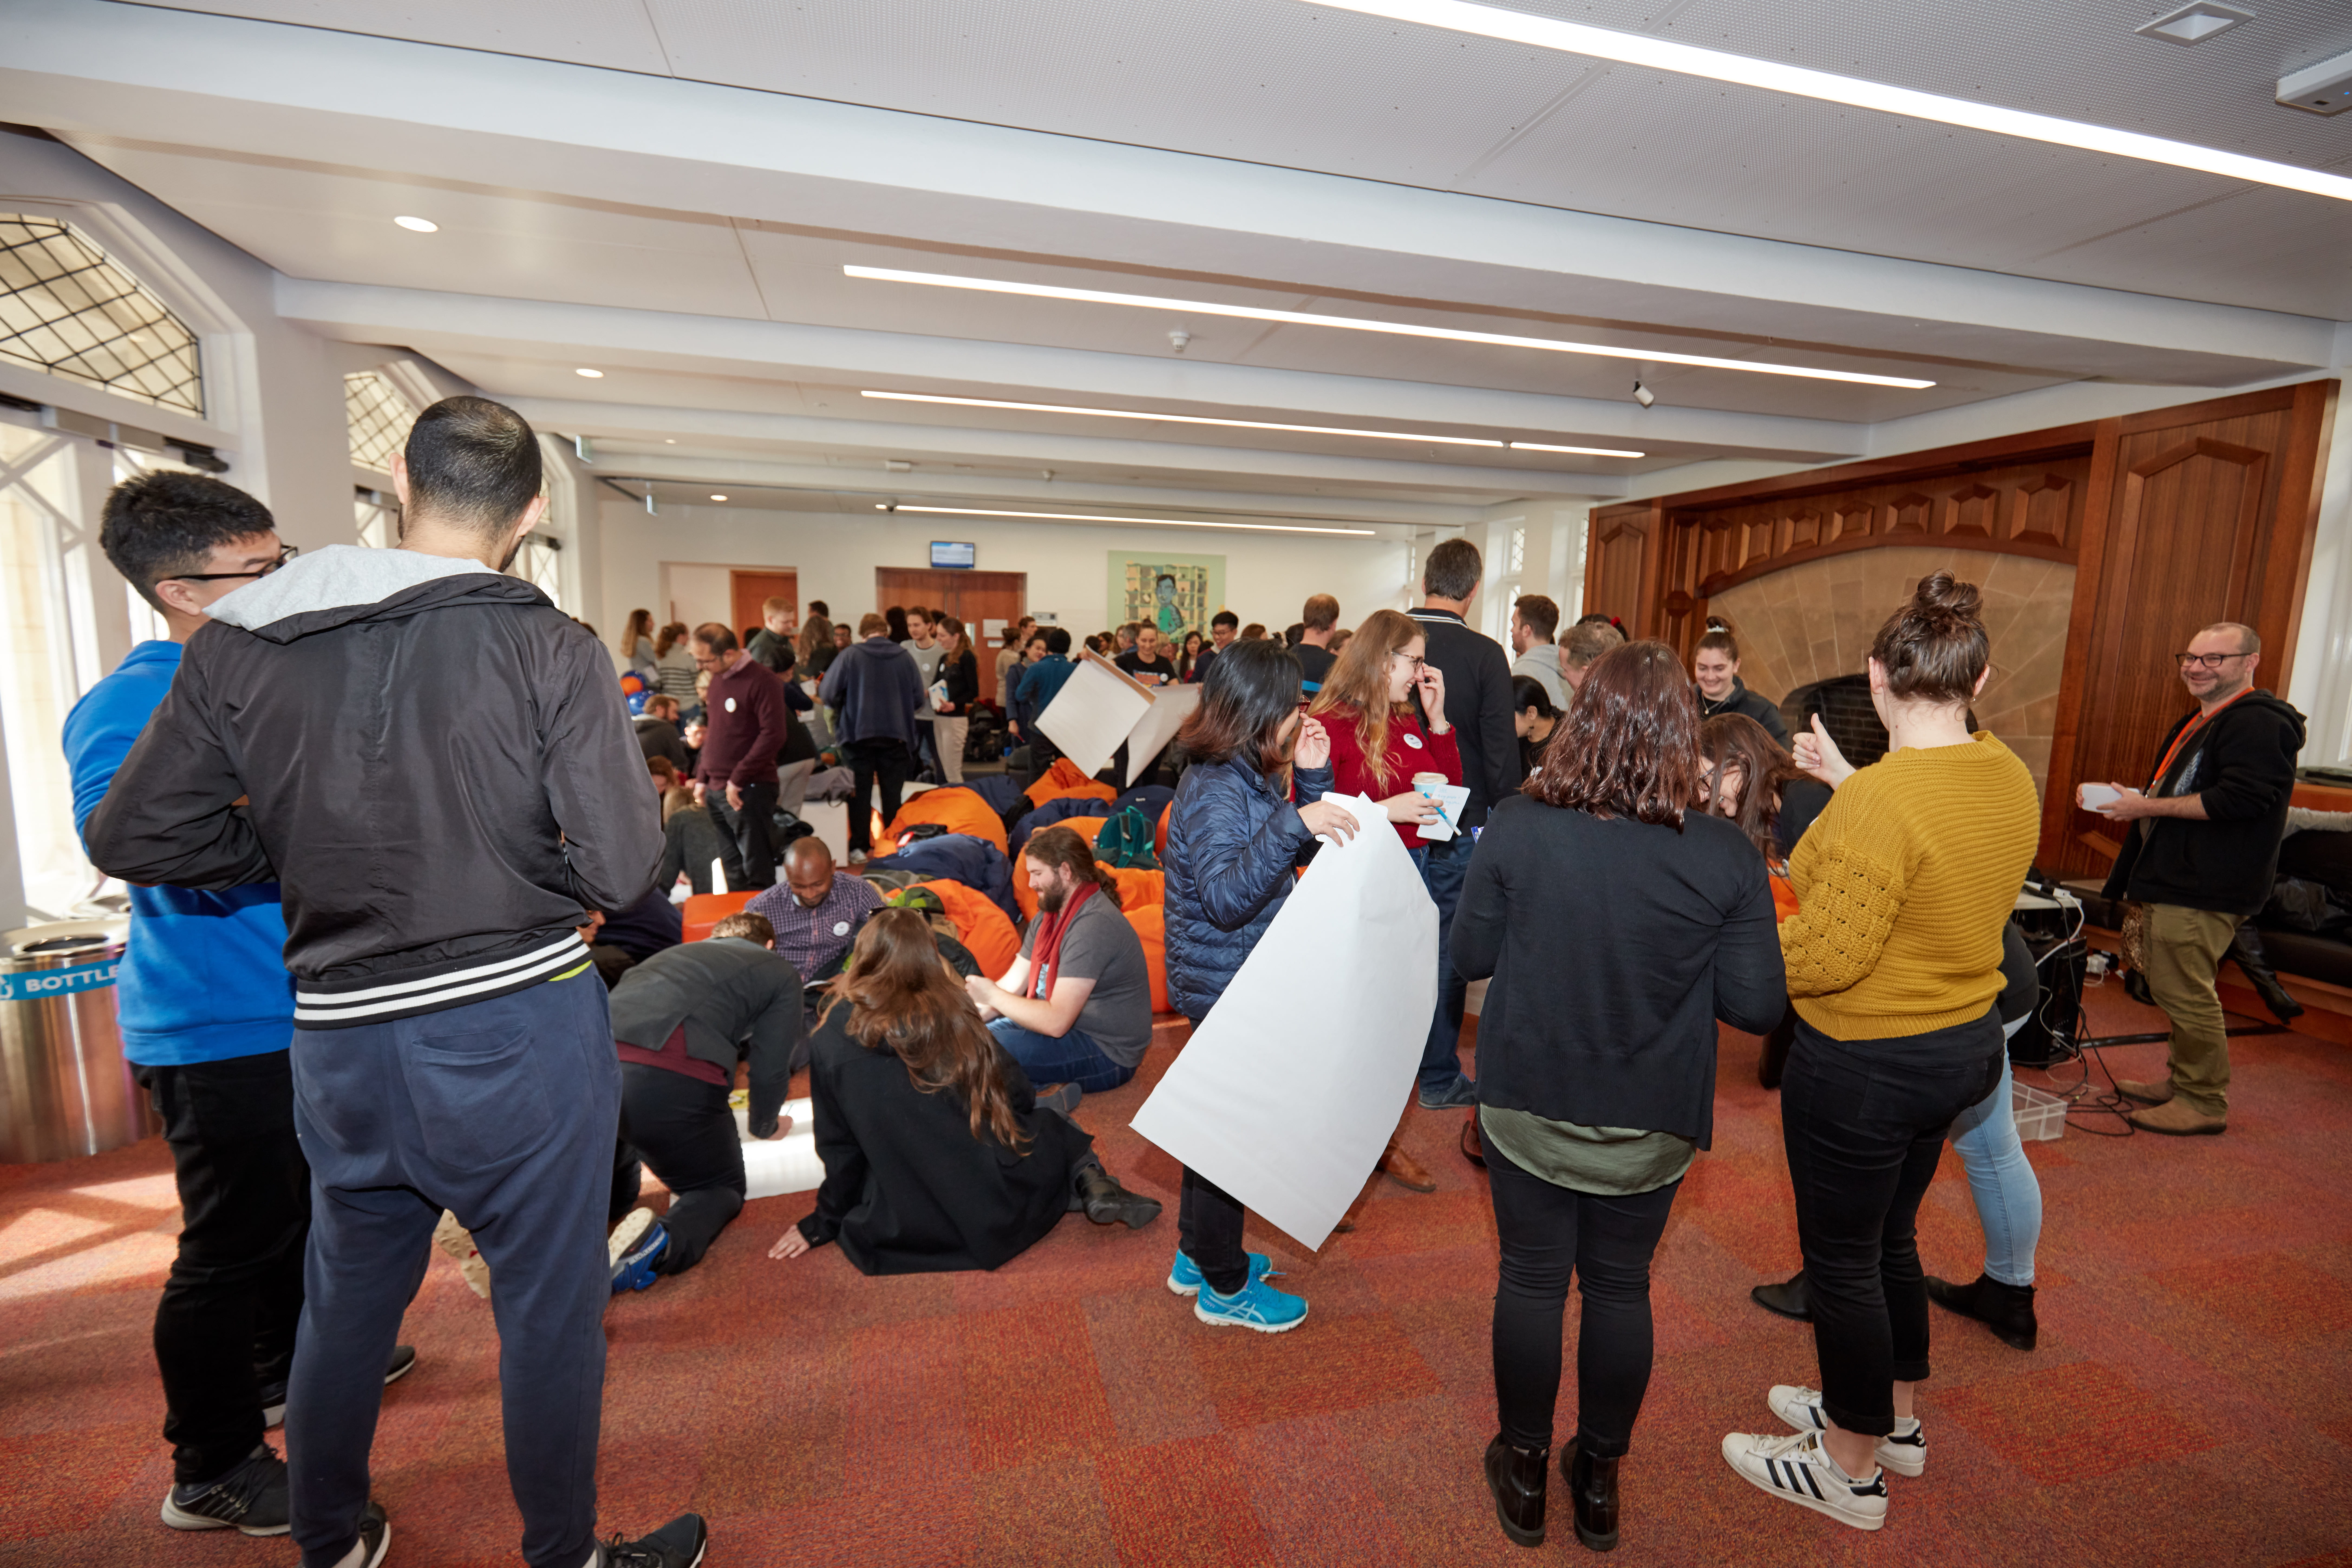 Photo taken at ResBaz 2019 of a interactive session similar to the planned HackyHour events.